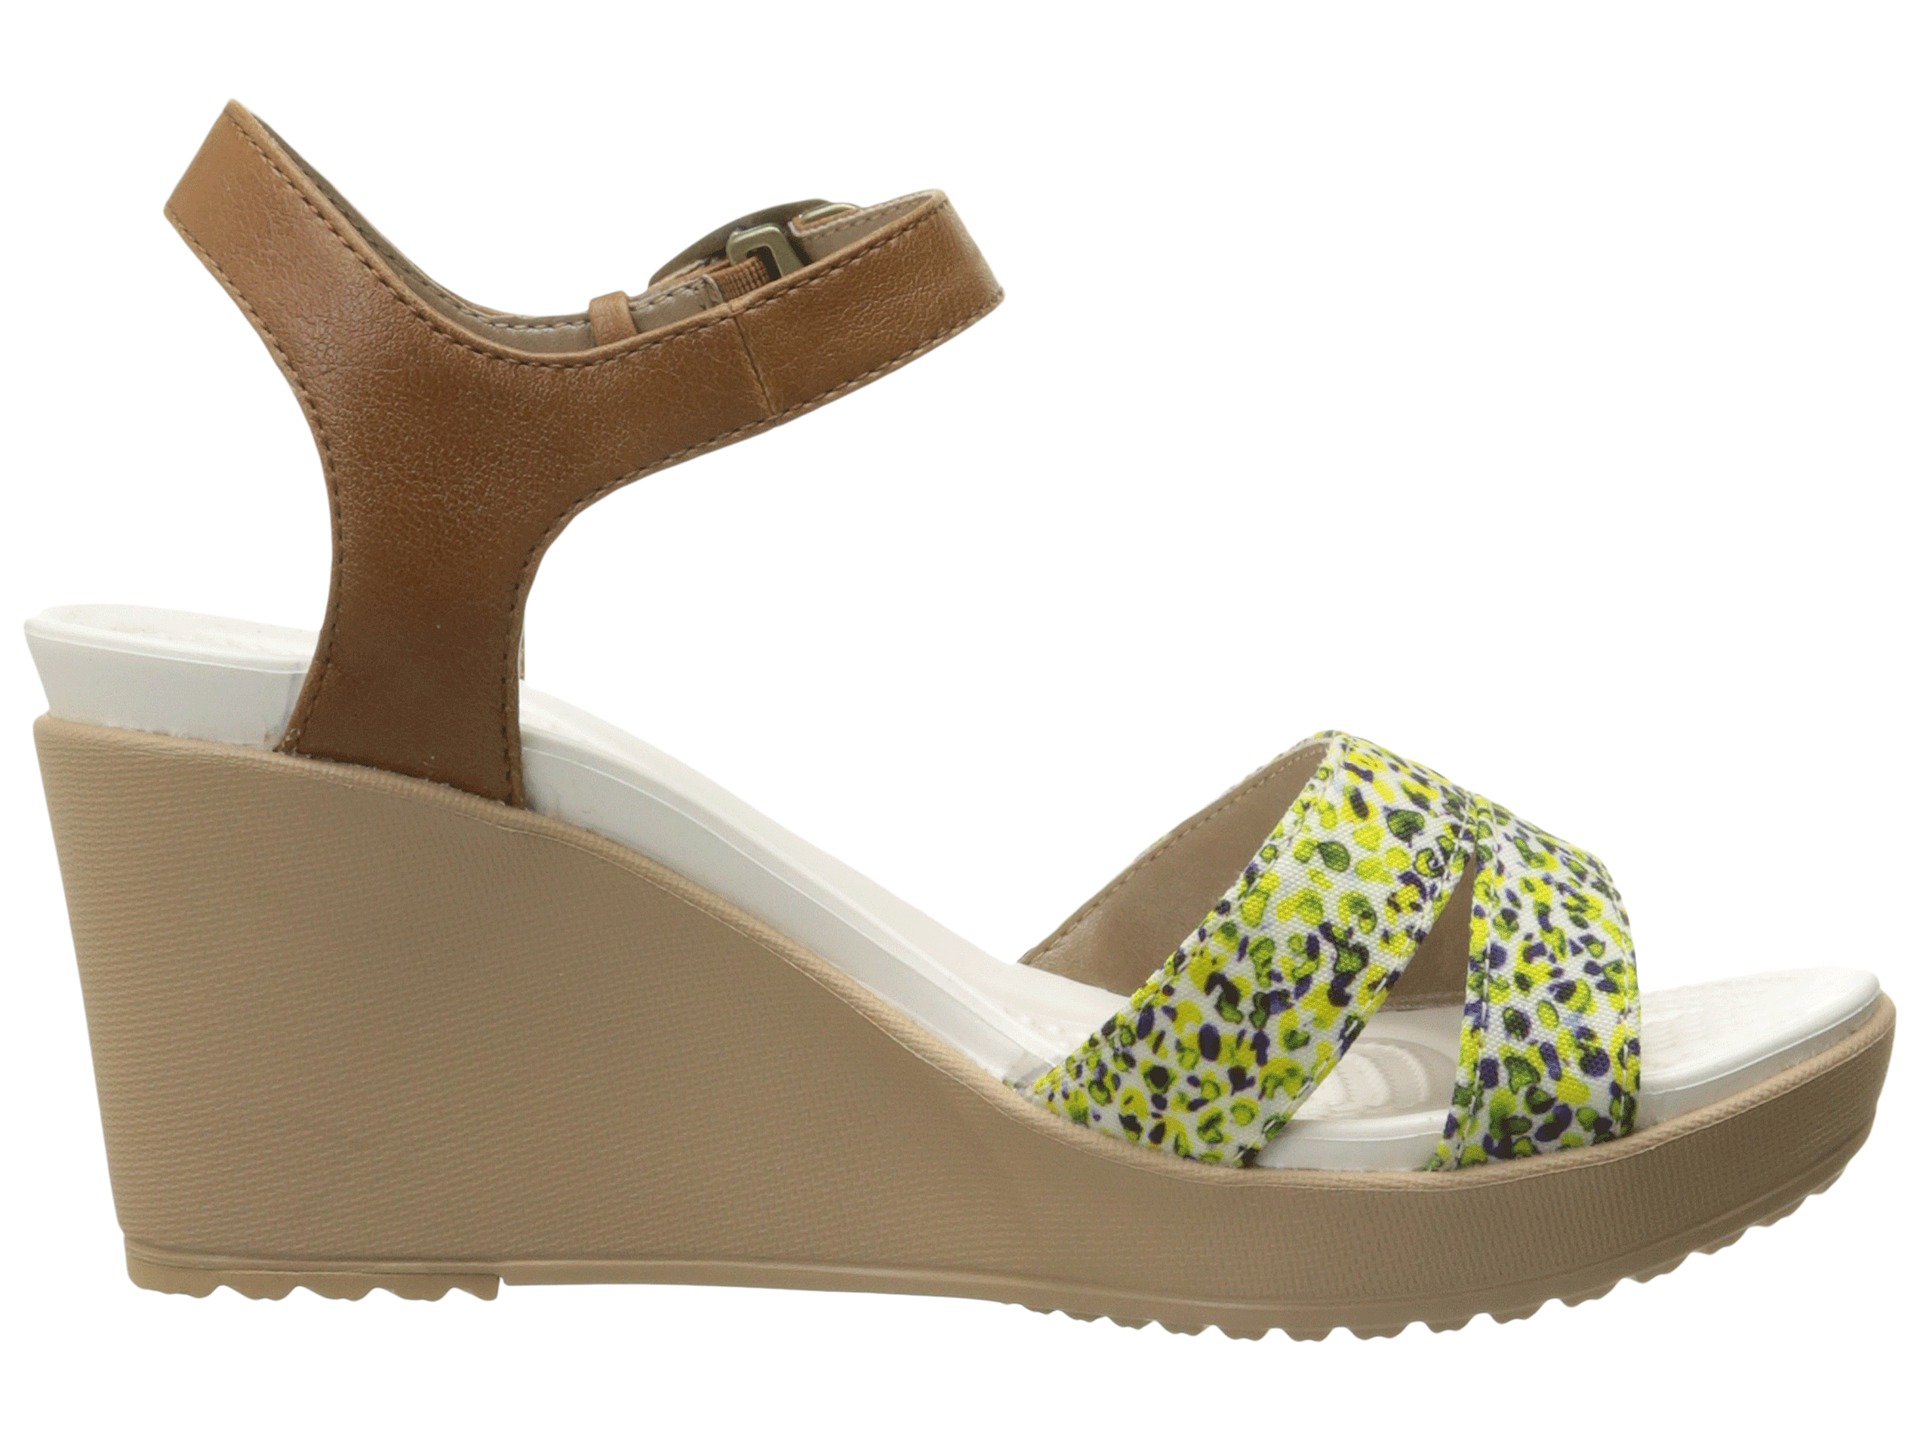 Crocs Leigh II Ankle Strap Graphic Wedge at Zappos.com